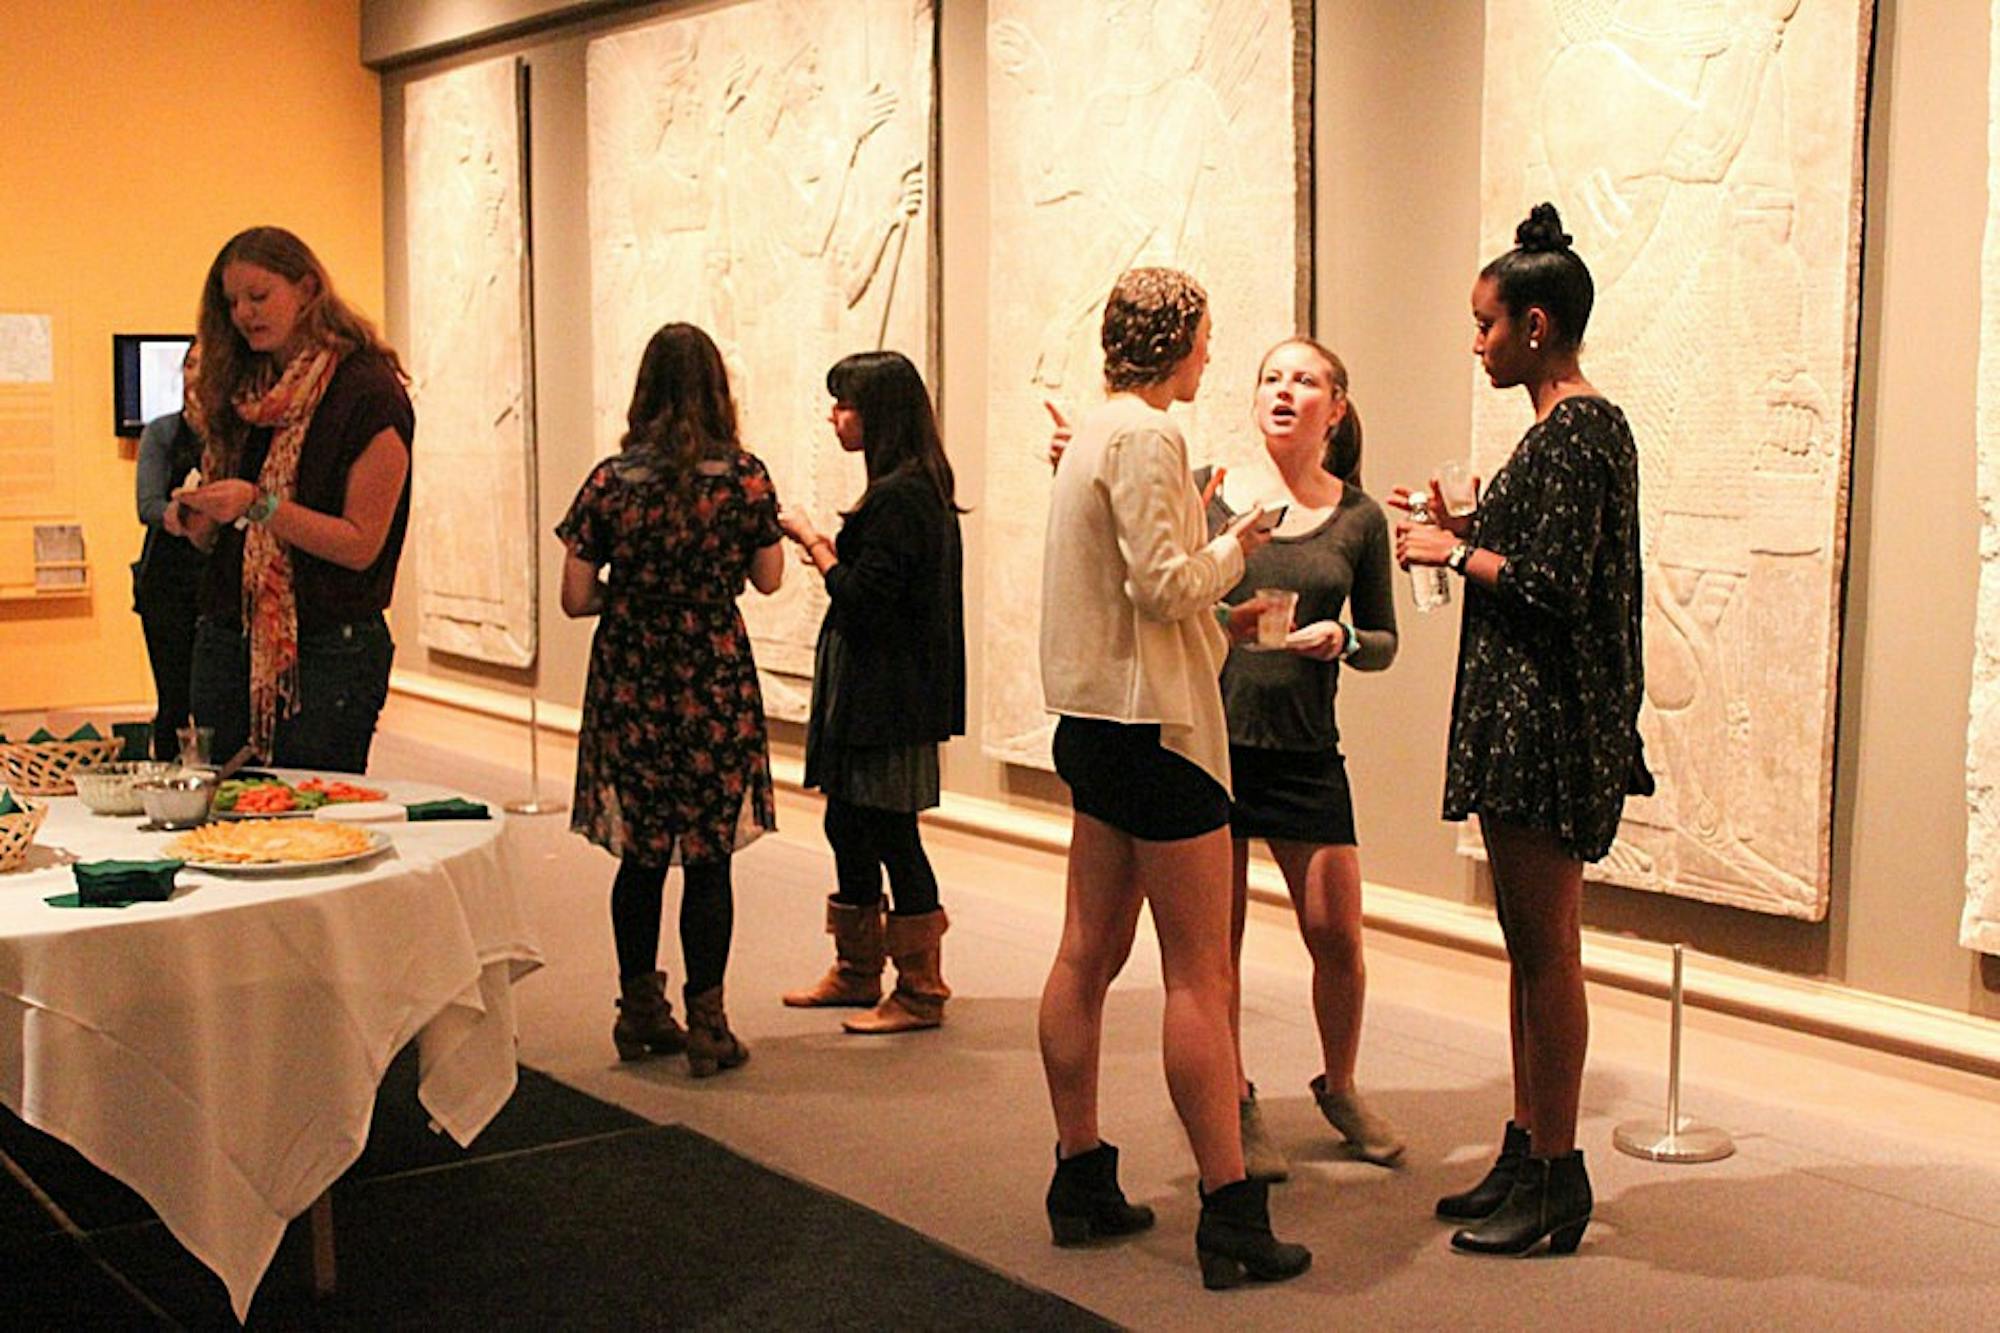 The Hood Museum of Art’s termly parties aim to expose students to art in a relaxed environment.